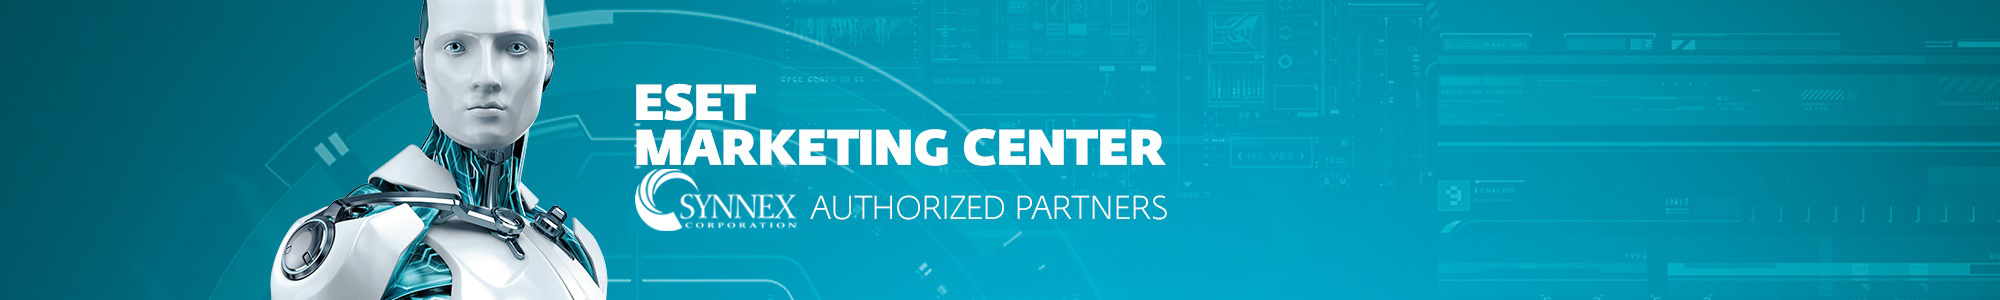 Welcome to the  ESET Marketing Center!,